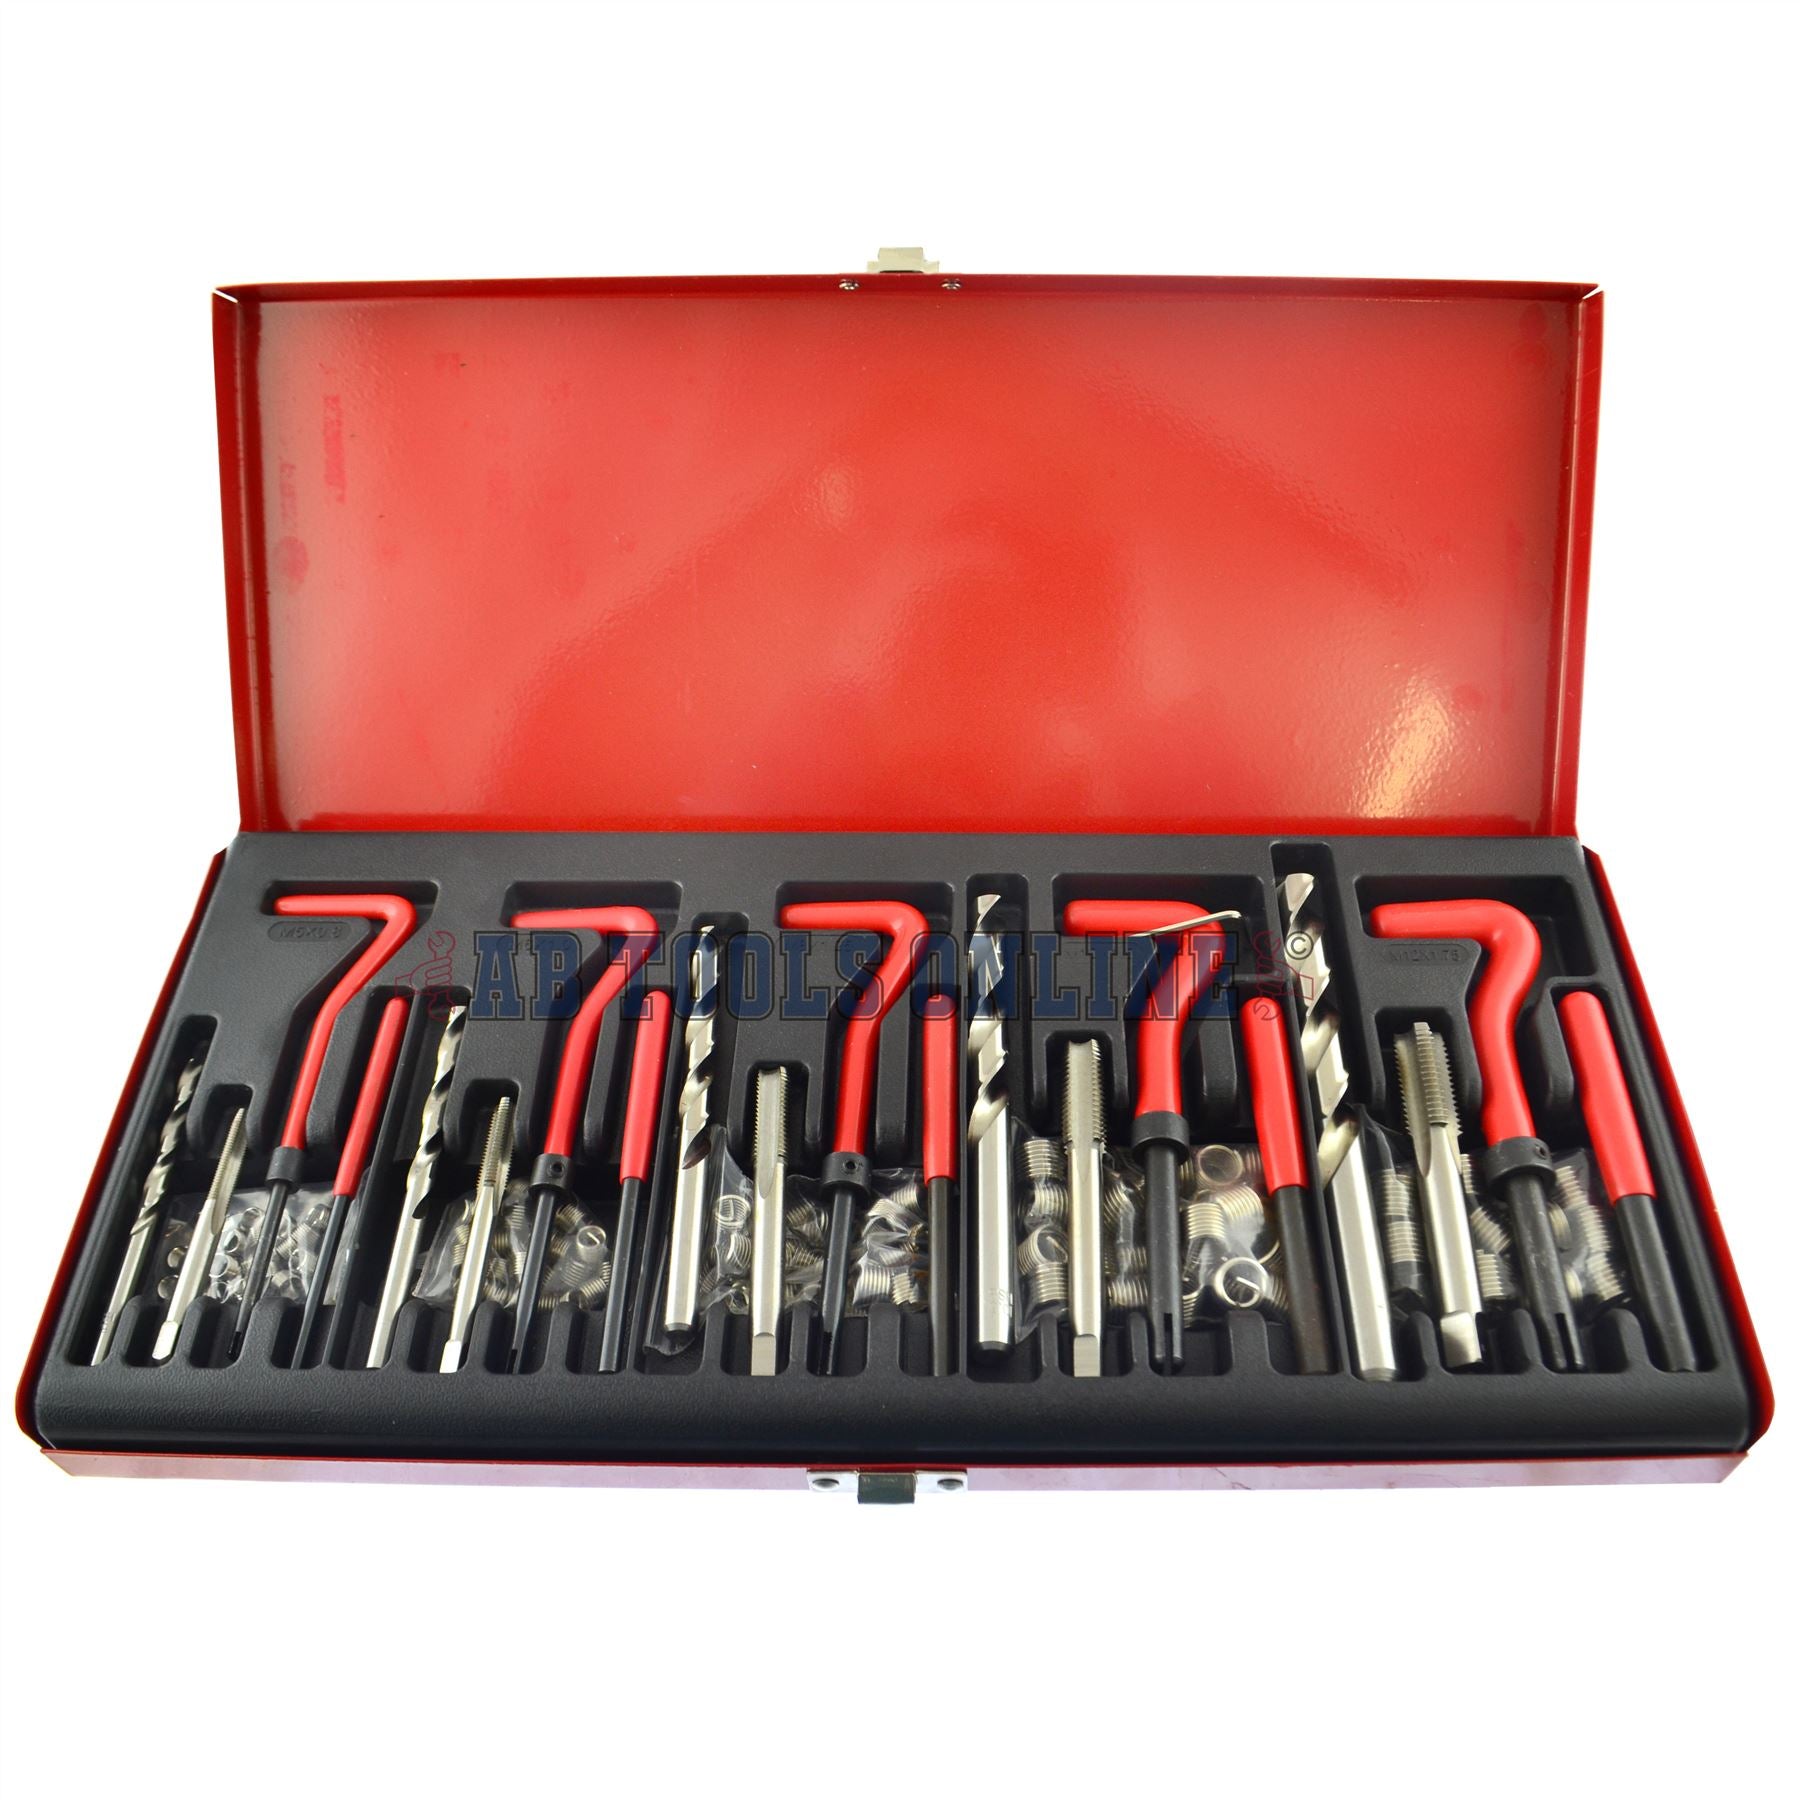 Thread installation and repair kit helicoil set 131pc metric sizes M5-M12 AN133